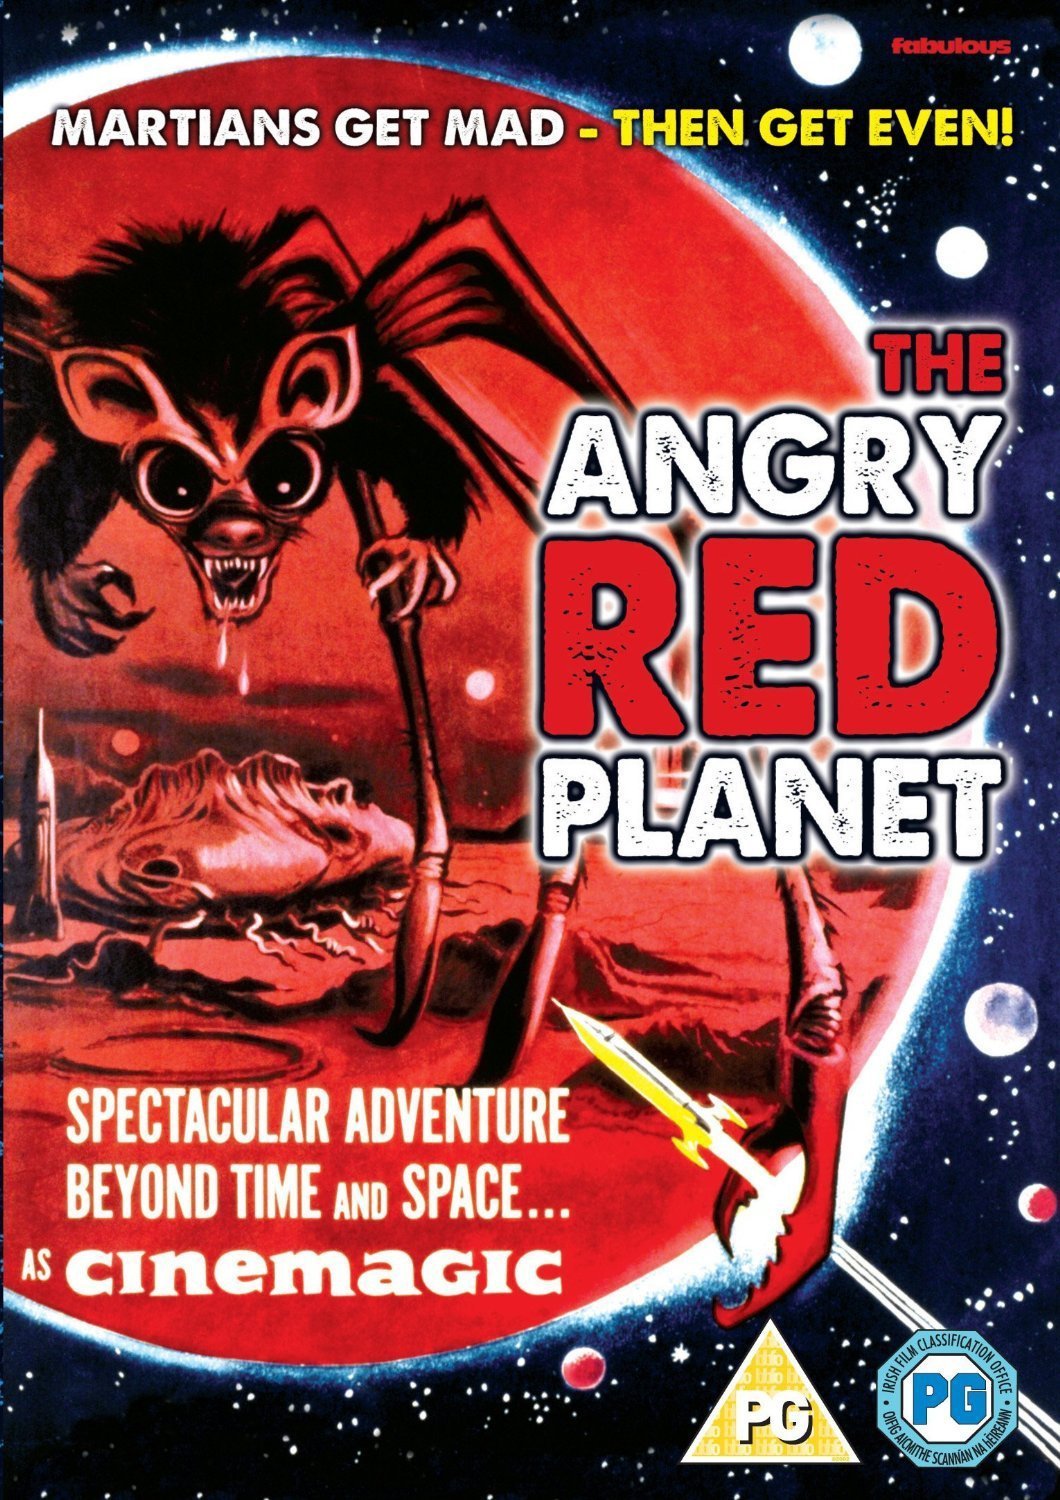 The Angry Red Planet (1969) starring Gerald Mohr, Nora Hayden